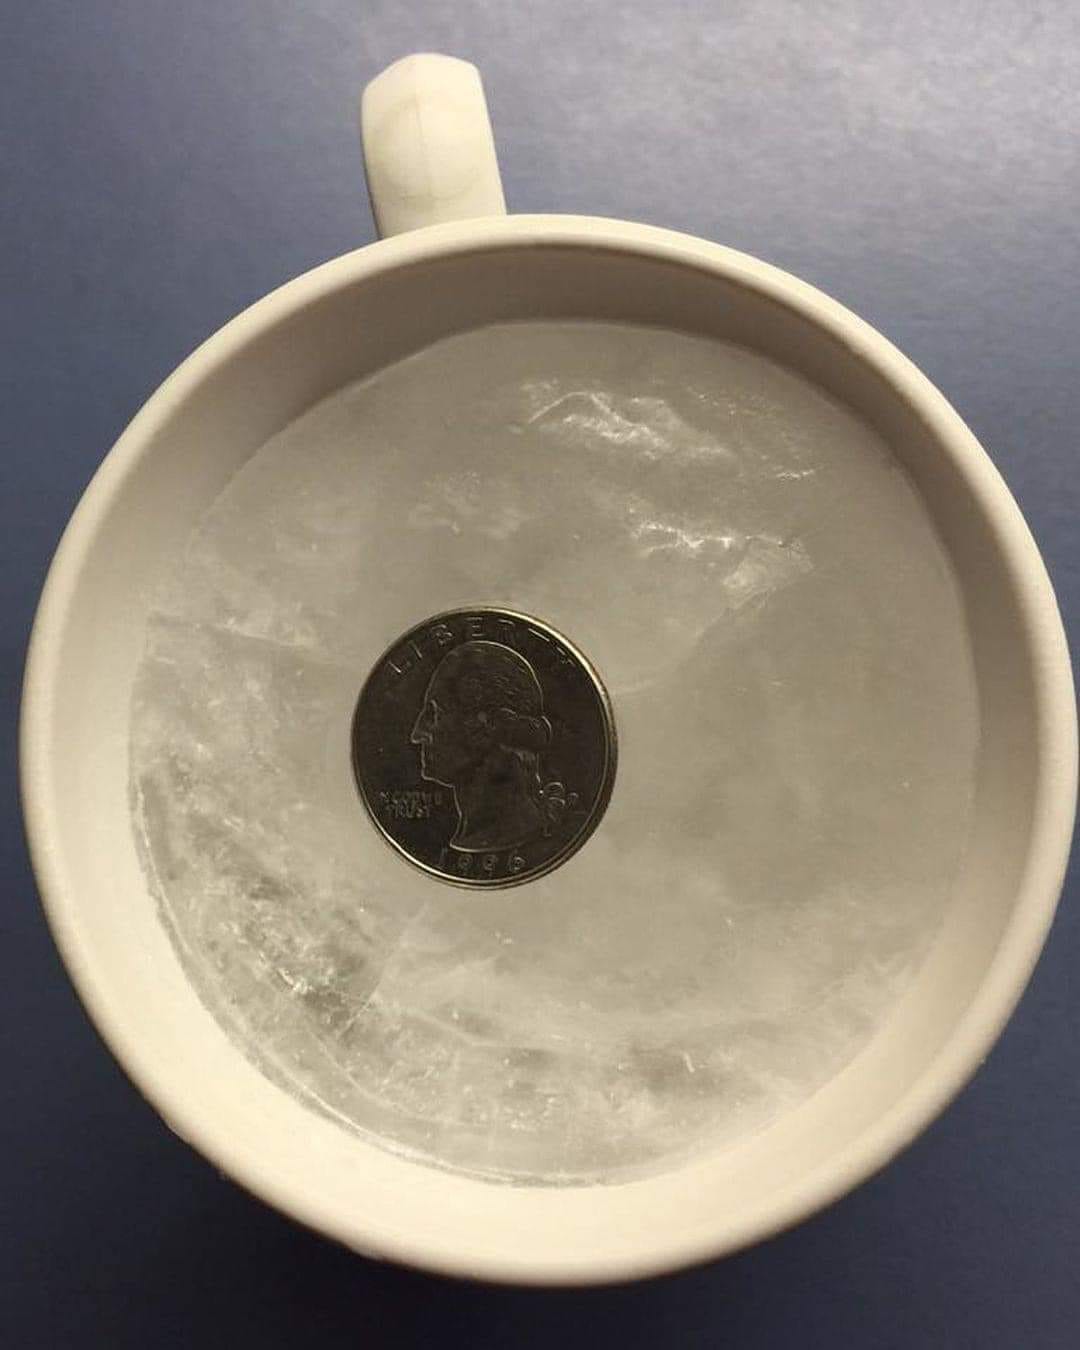 Why You Should Always Place a Coin on a Frozen Cup of Water Before Storms